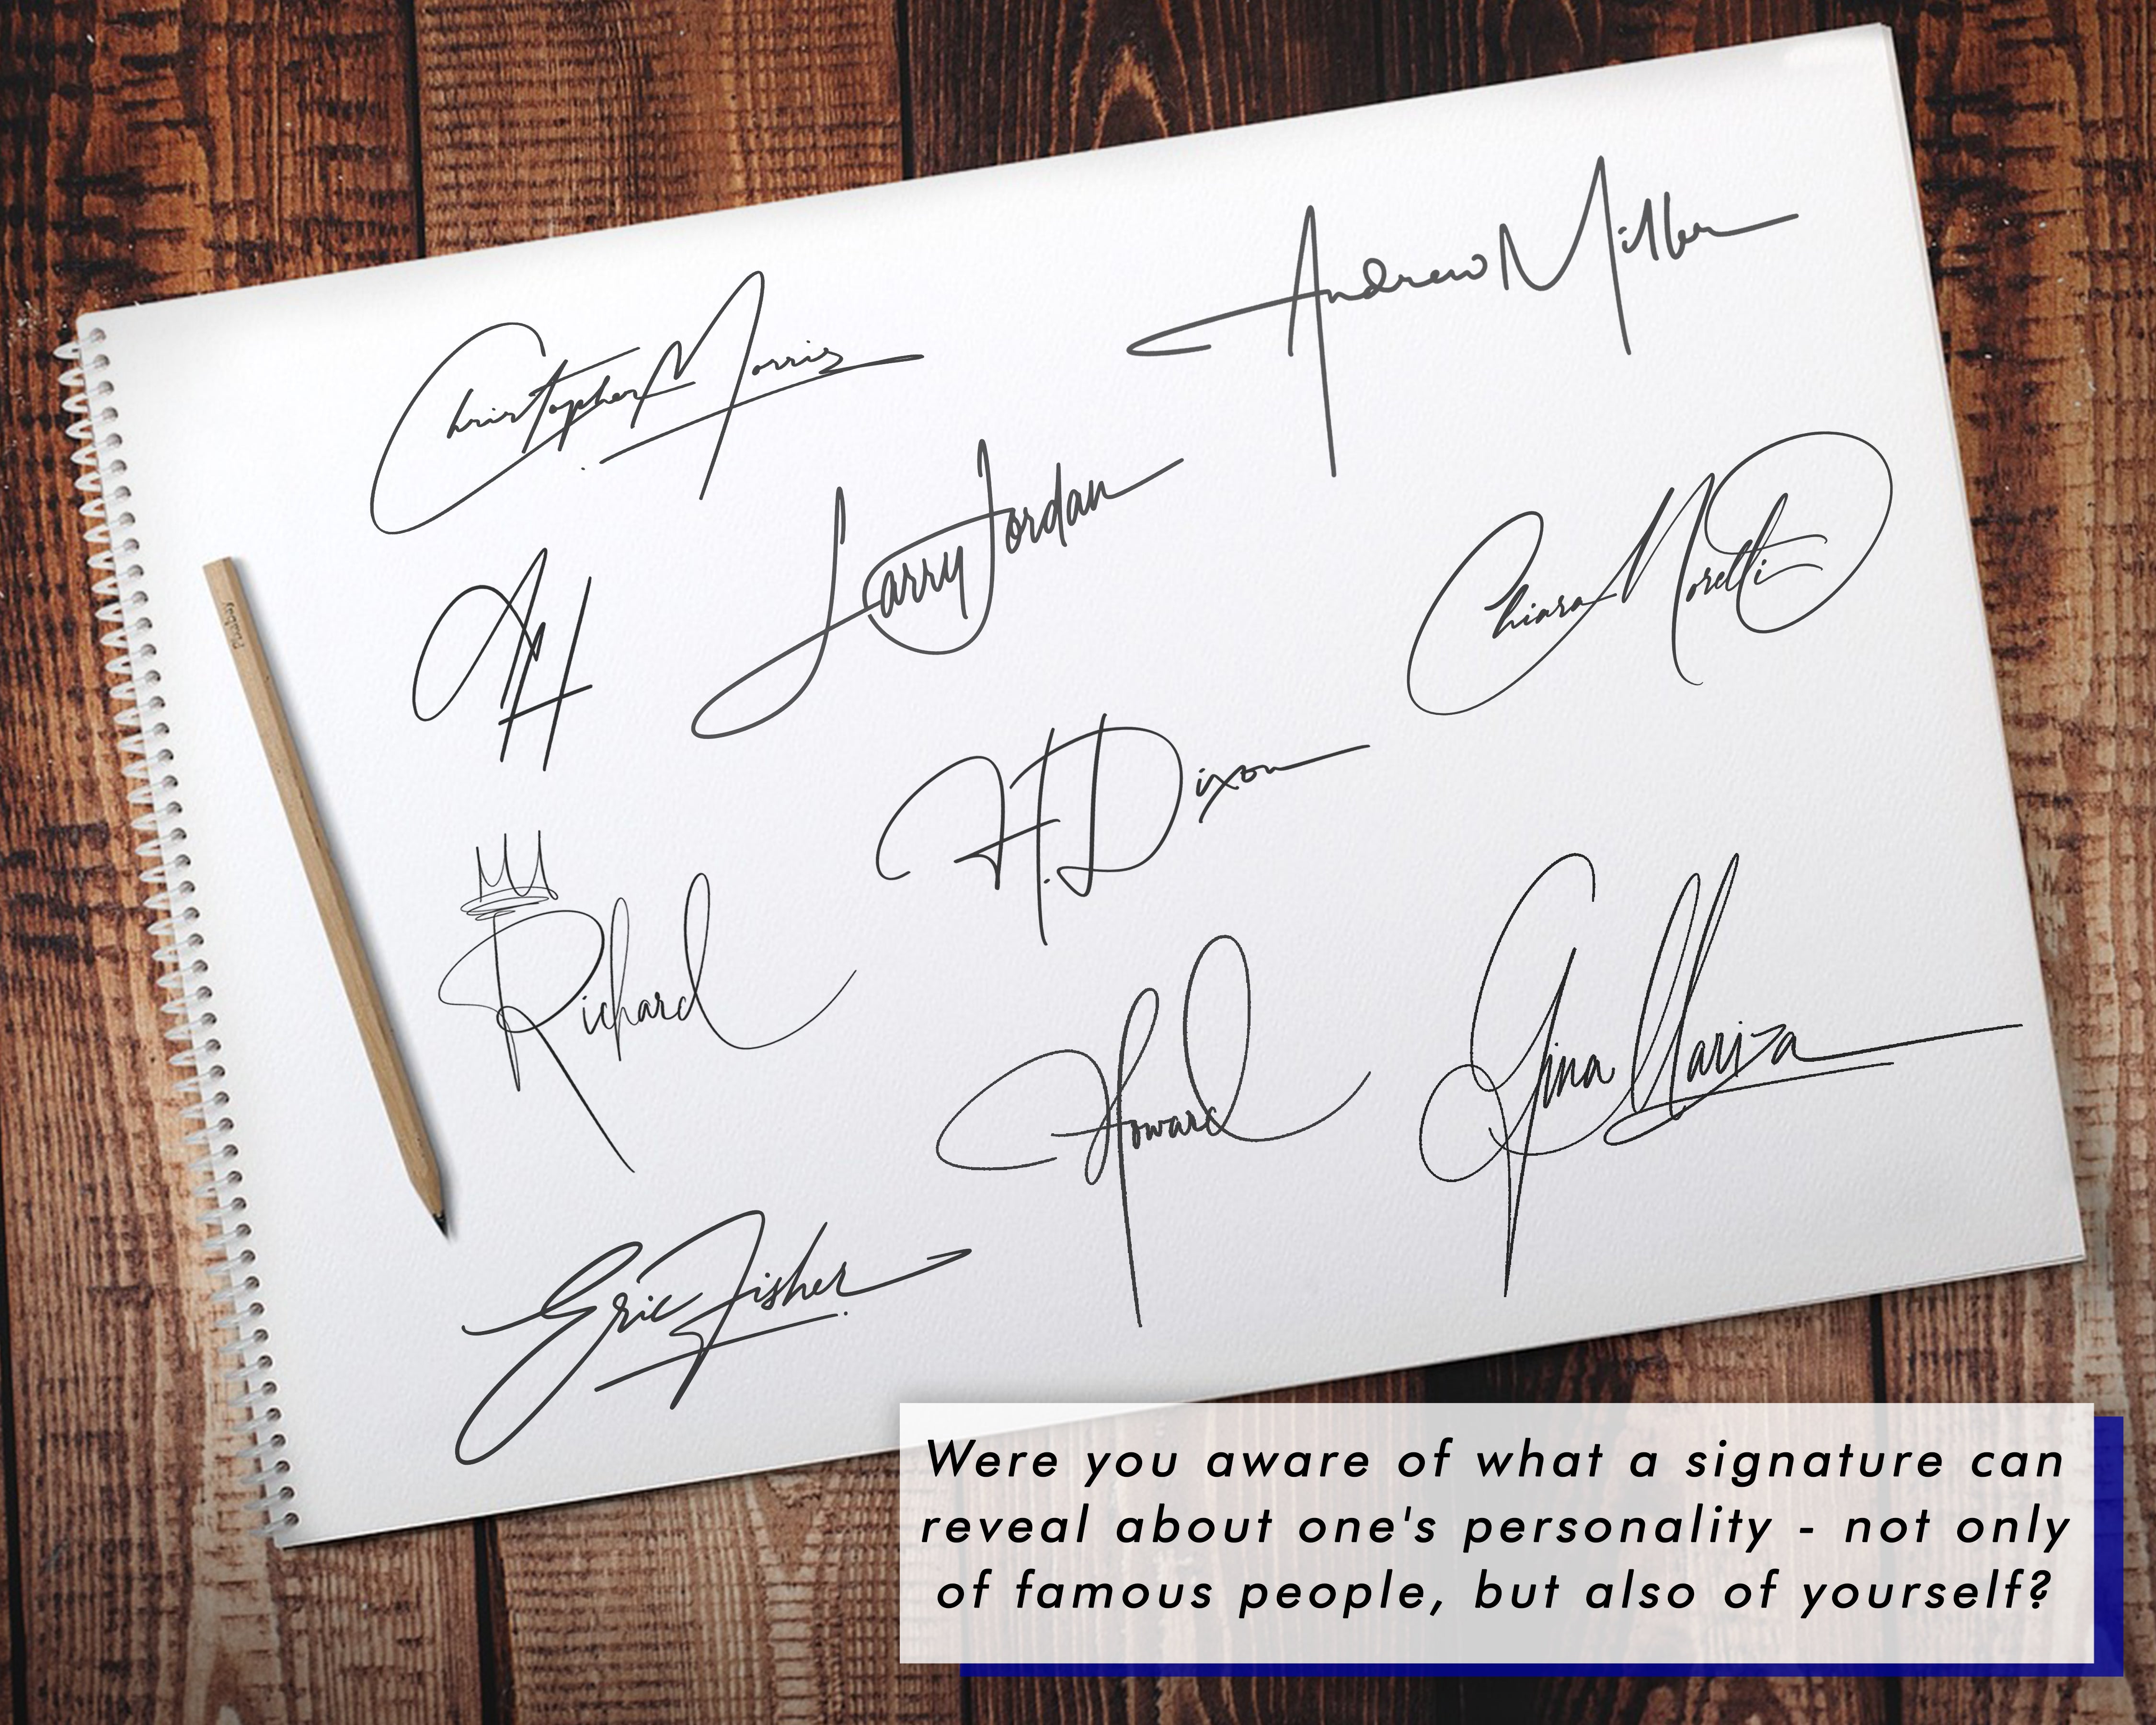 Were you aware of what a signature can reveal about one's personality - not only of famous people, but also of yourself?